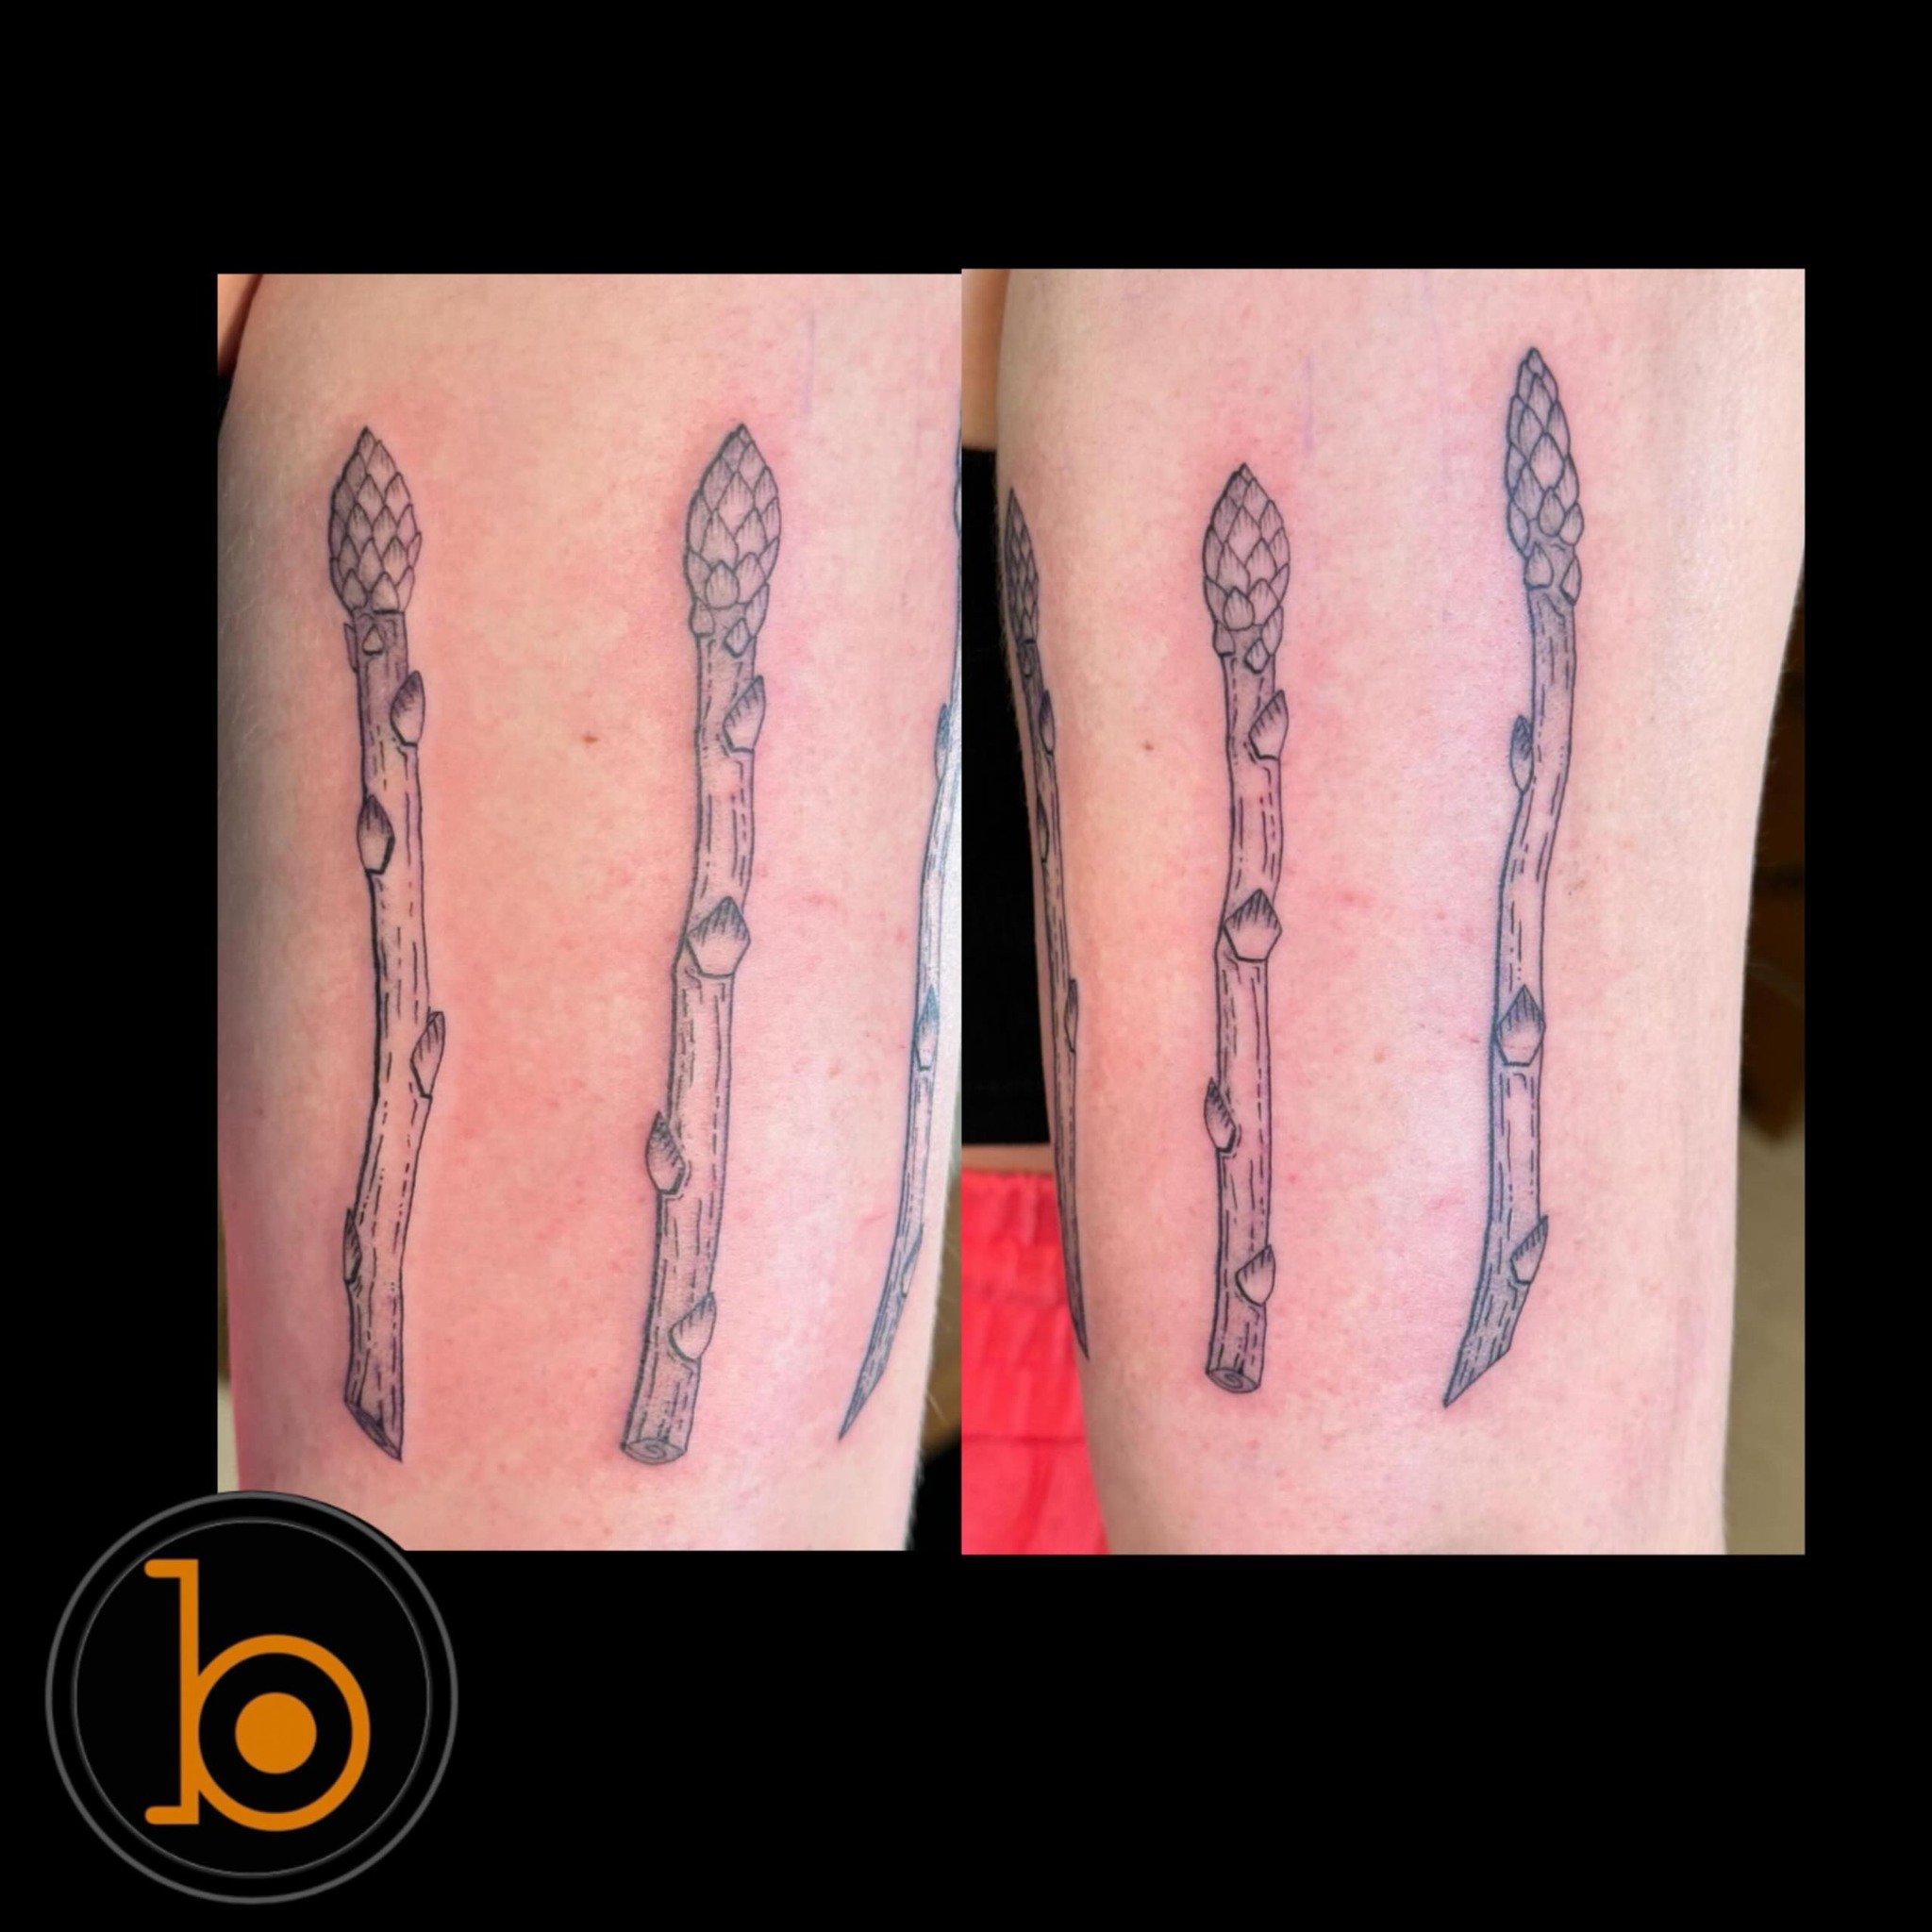 We&rsquo;re big fans of this wrapping asparagus piece by resident artist @vct.tattoos 🌱🖤
➖➖➖➖➖➖➖➖➖➖➖➖➖➖➖➖➖
Blueprint Gallery
138 Russell St
 Hadley MA 01035
📱(413)-387-0221 
WALK-INS WELCOME 
🕸️ www.blueprintgallery.com 🕸️
⬇️⬇️⬇️⬇️⬇️⬇️⬇️⬇️⬇️⬇️⬇️